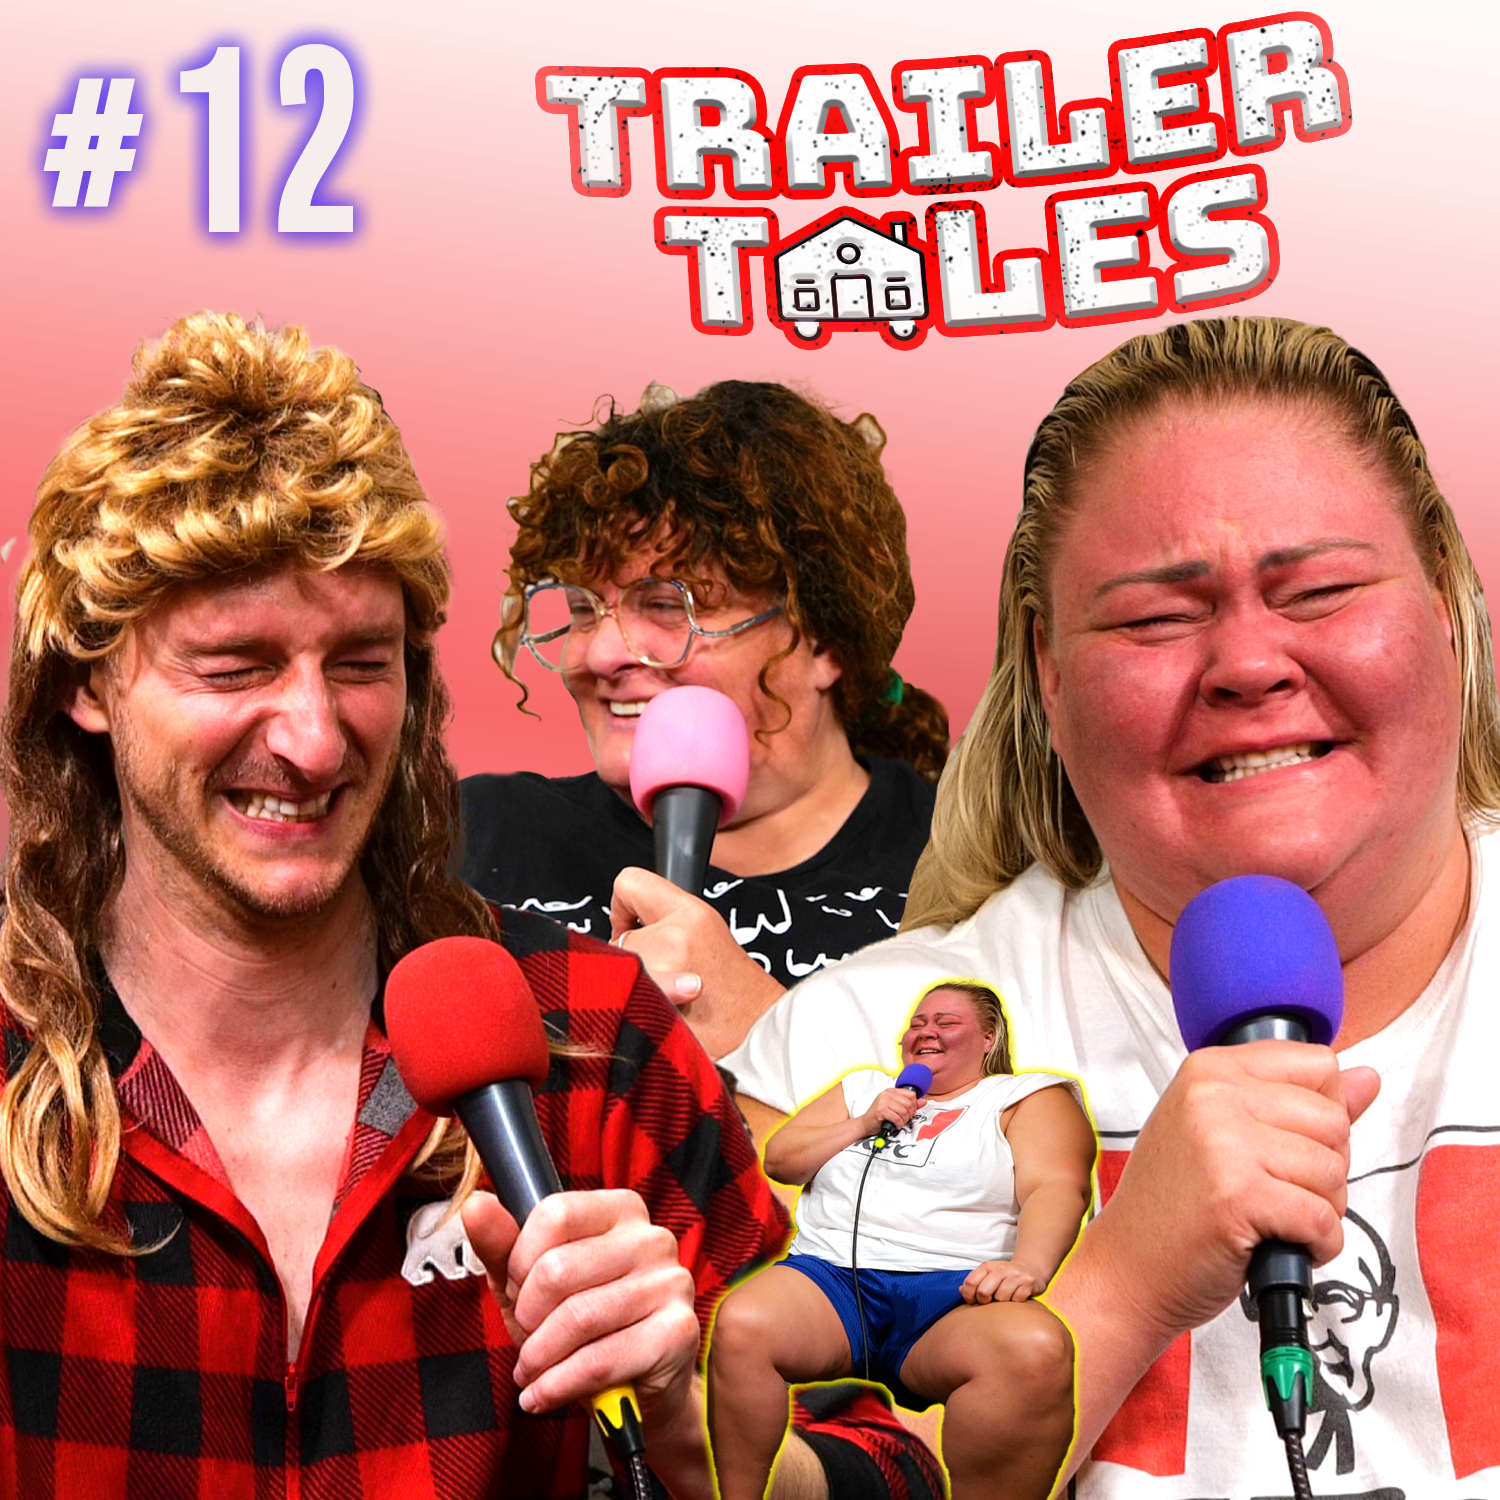 S2 Ep12: BINGO! Tammy PEES her shorts | Trailer Tales w/ Trailer Trash Tammy, Dave Gunther & Crystal | Ep 12